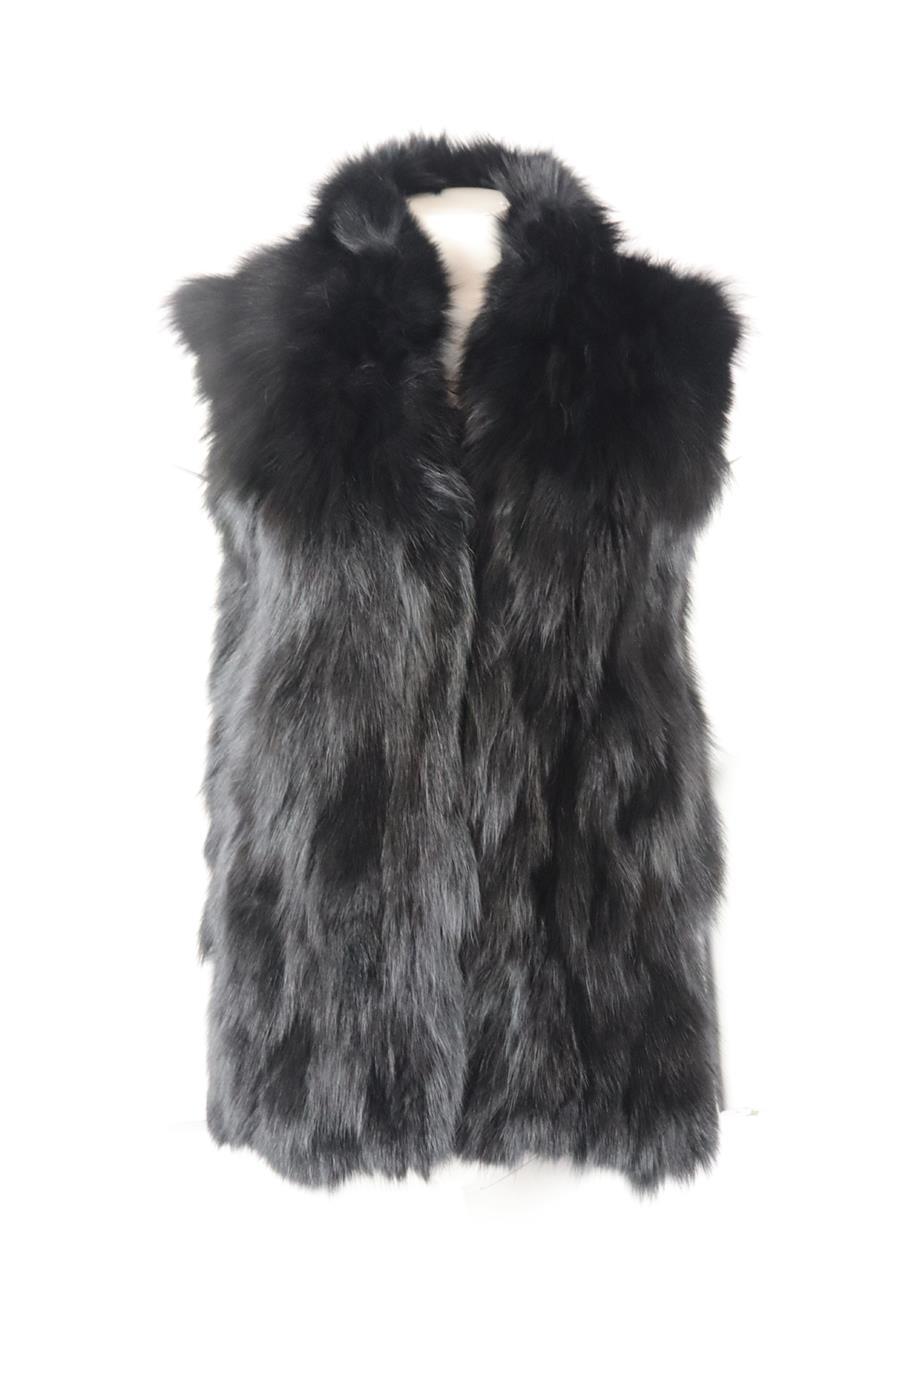 Adrienne Landau rabbit and fox fur gilet. Black. Sleeveless, crewneck. Hook and eye fastening at front. 50% Rabbit fur, 50% fox fur; lining: 100% polyester. Size: Small (UK 8, US 4, FR 36, IT 40). Shoulder to shoulder: 16.5 in. Bust: 37.2 in. Waist: